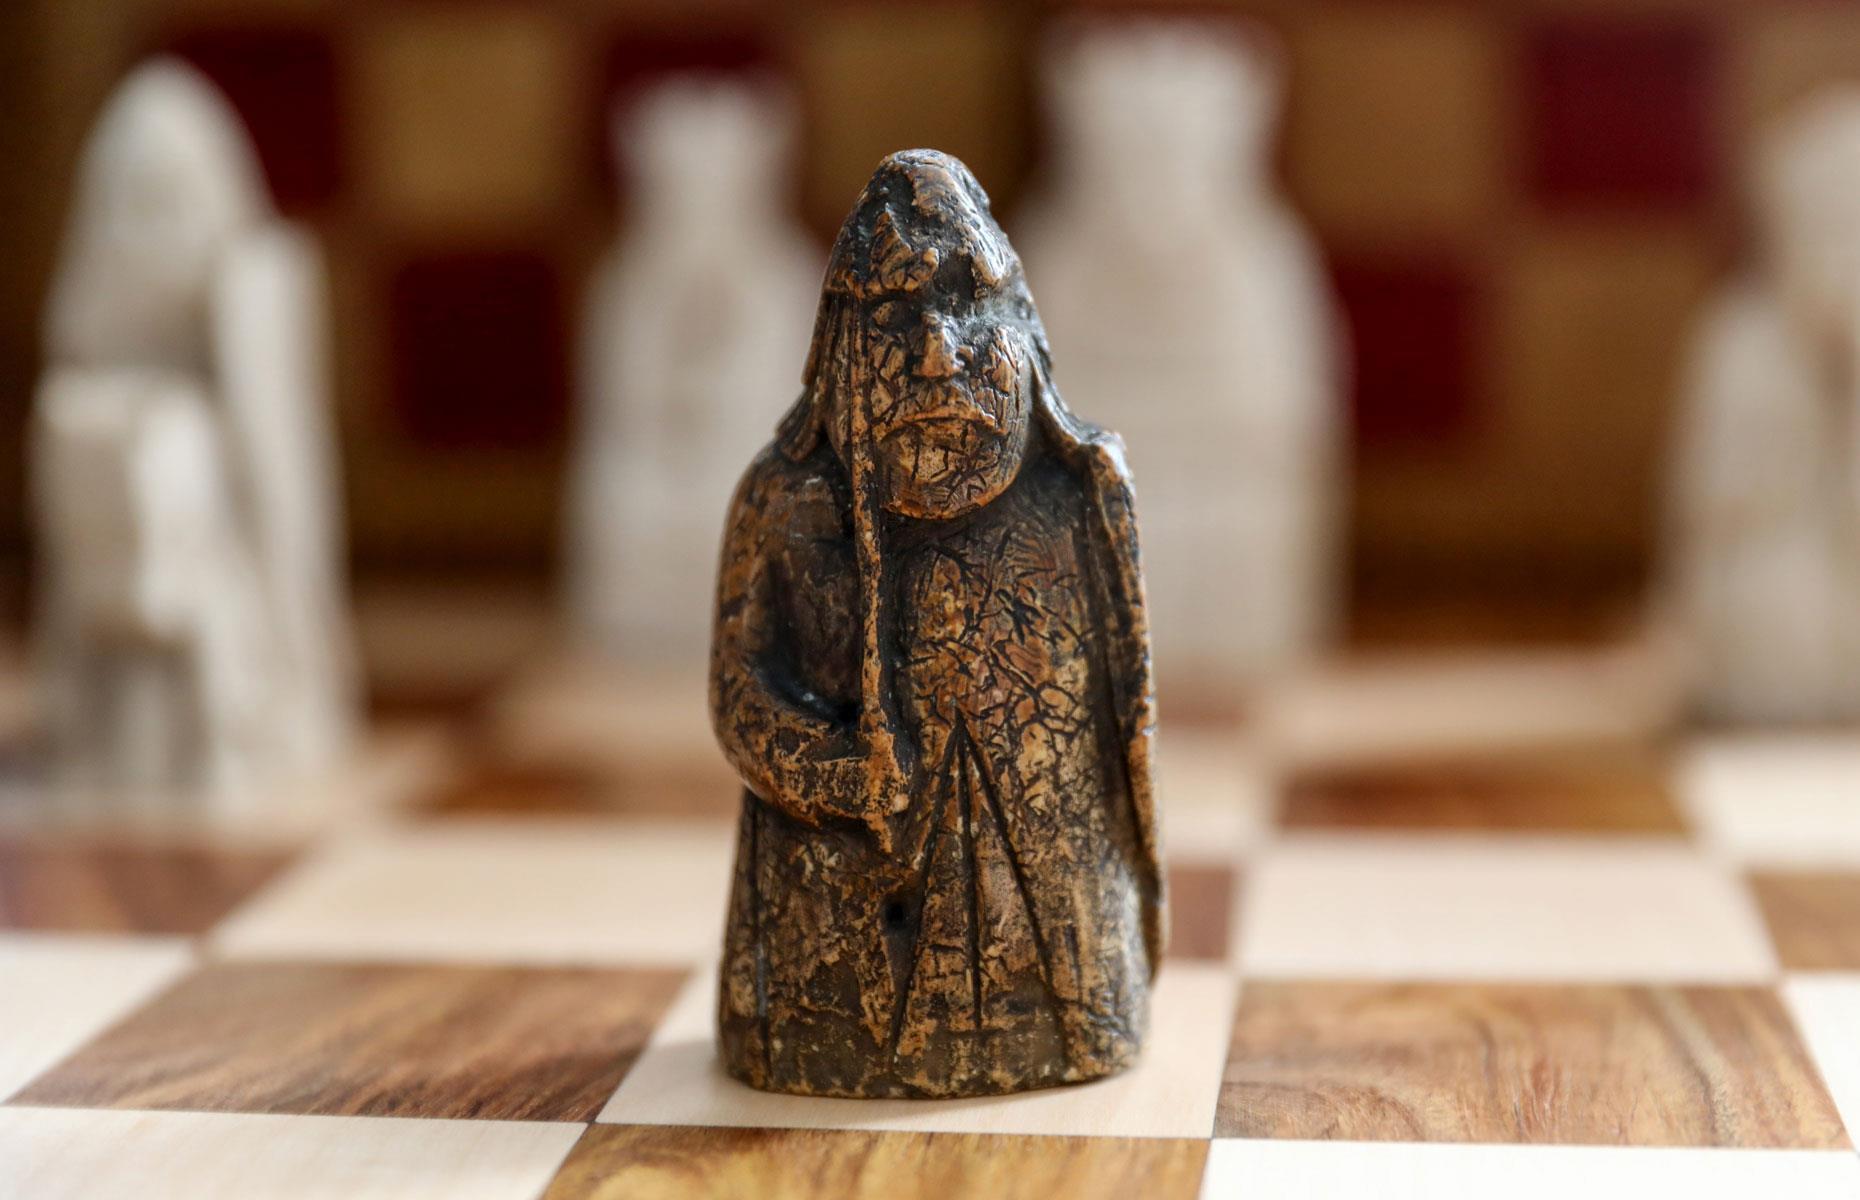 2019: Long-lost chess piece worth hundreds of thousands